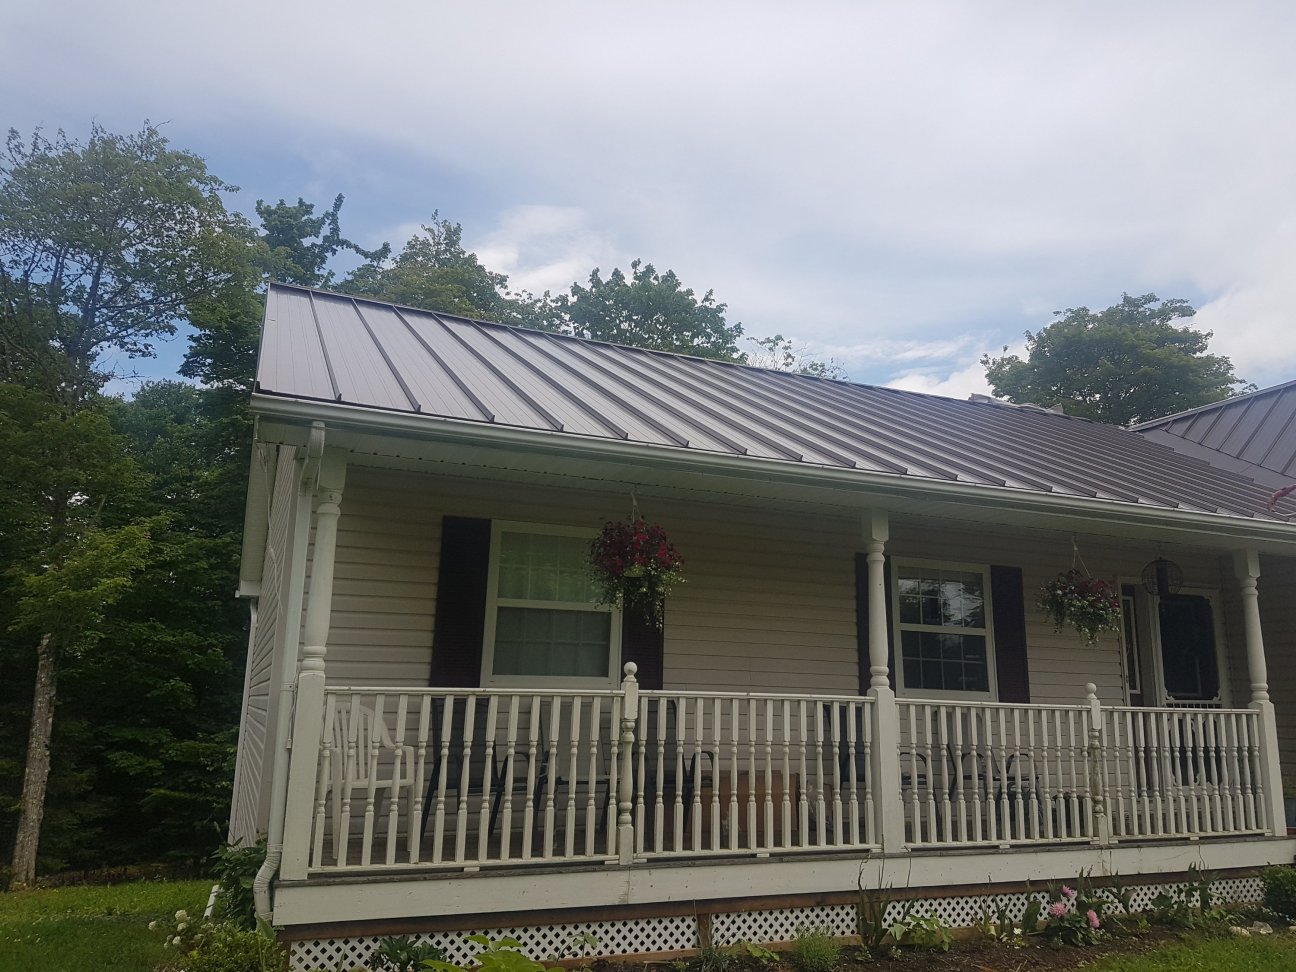 Home in Dartmouth with metal roof installed by Ruggles Contracting